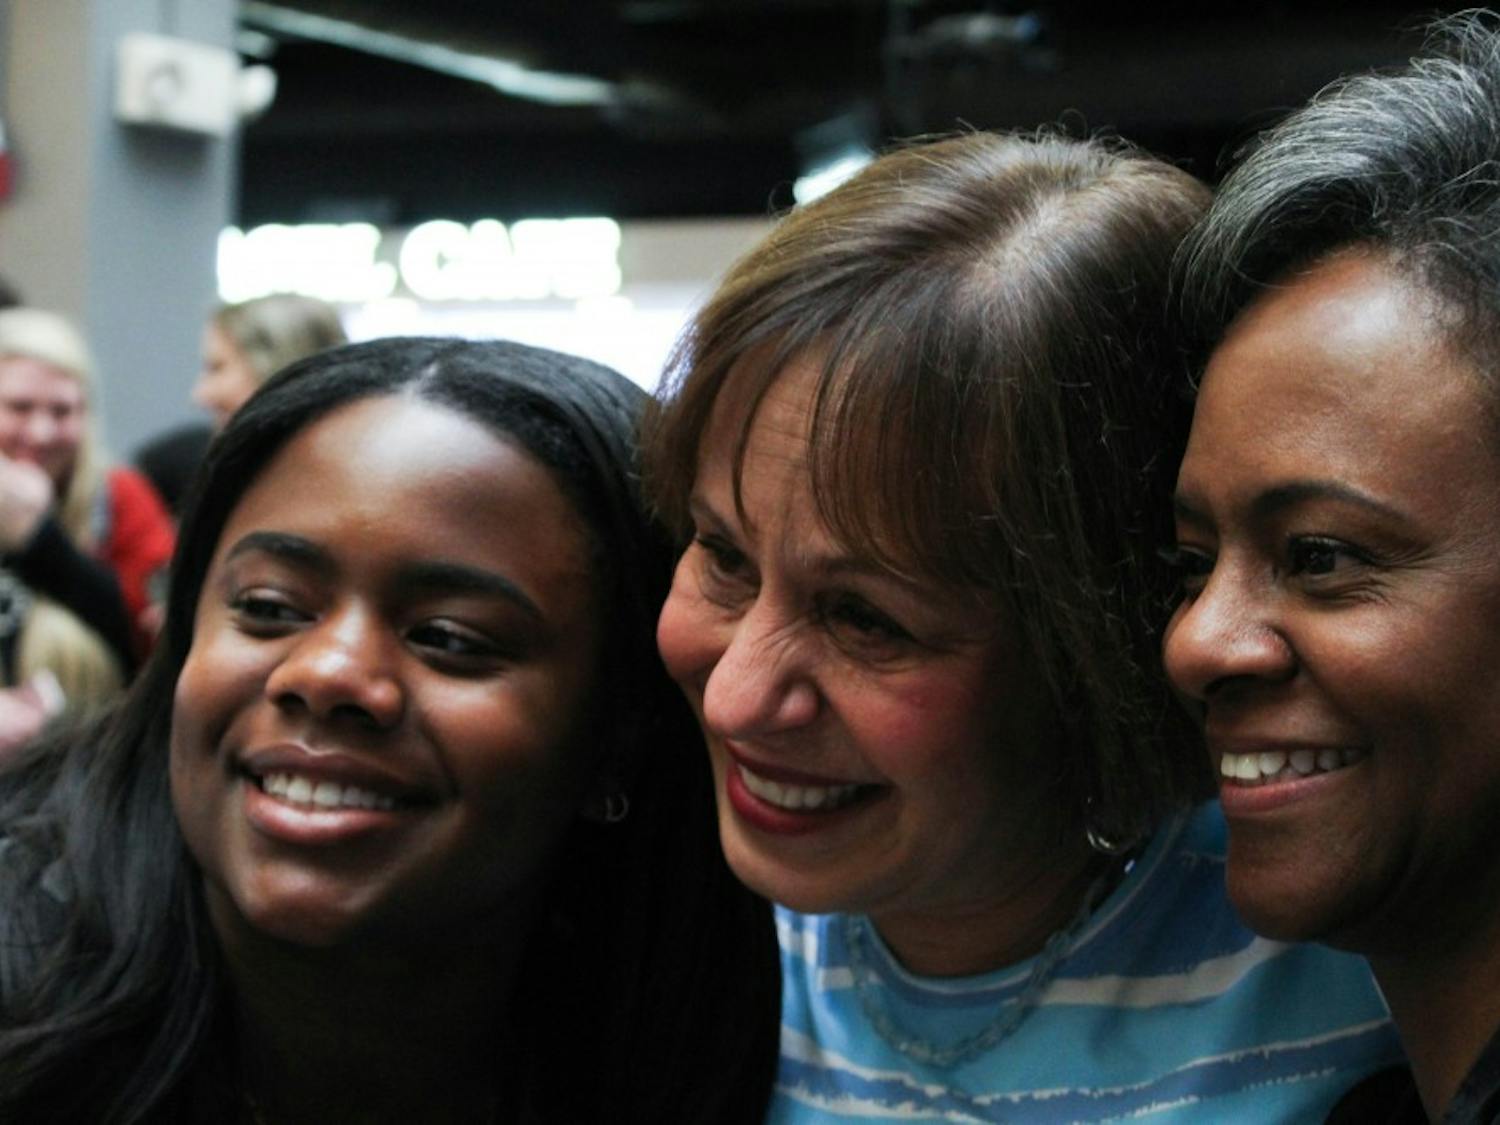 Chancellor Carol Folt taking a selfie with first-year Alexandra Mauney, exercise and sports science major and daughter of vice-chancellor Felicia Washington, and vice-chancellor Felicia Washington at "Thank you, Carolina" on Tuesday, Jan. 29, 2019, in the Carolina Union. Mauney says that it "breaks her heart" that Folt is leaving, but that it is "good to know that Folt is leaving with a lasting impact on the Carolina community."